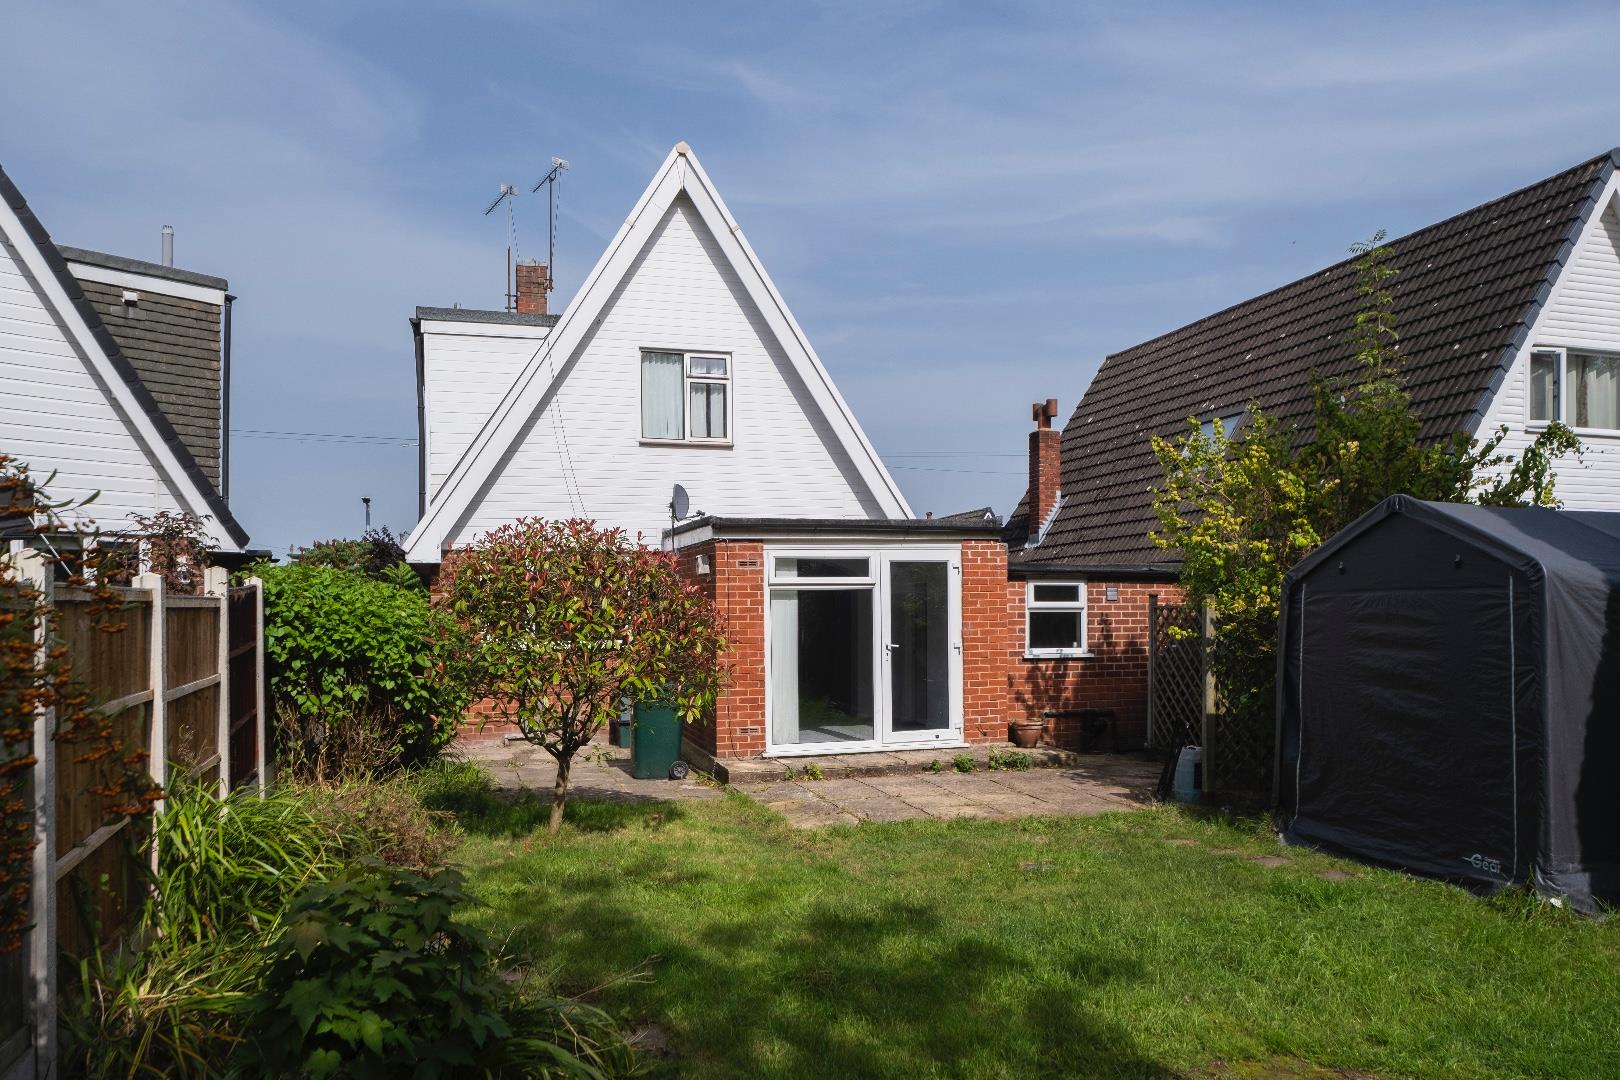 3 bedroom  Detached House for Sale in Tarvin